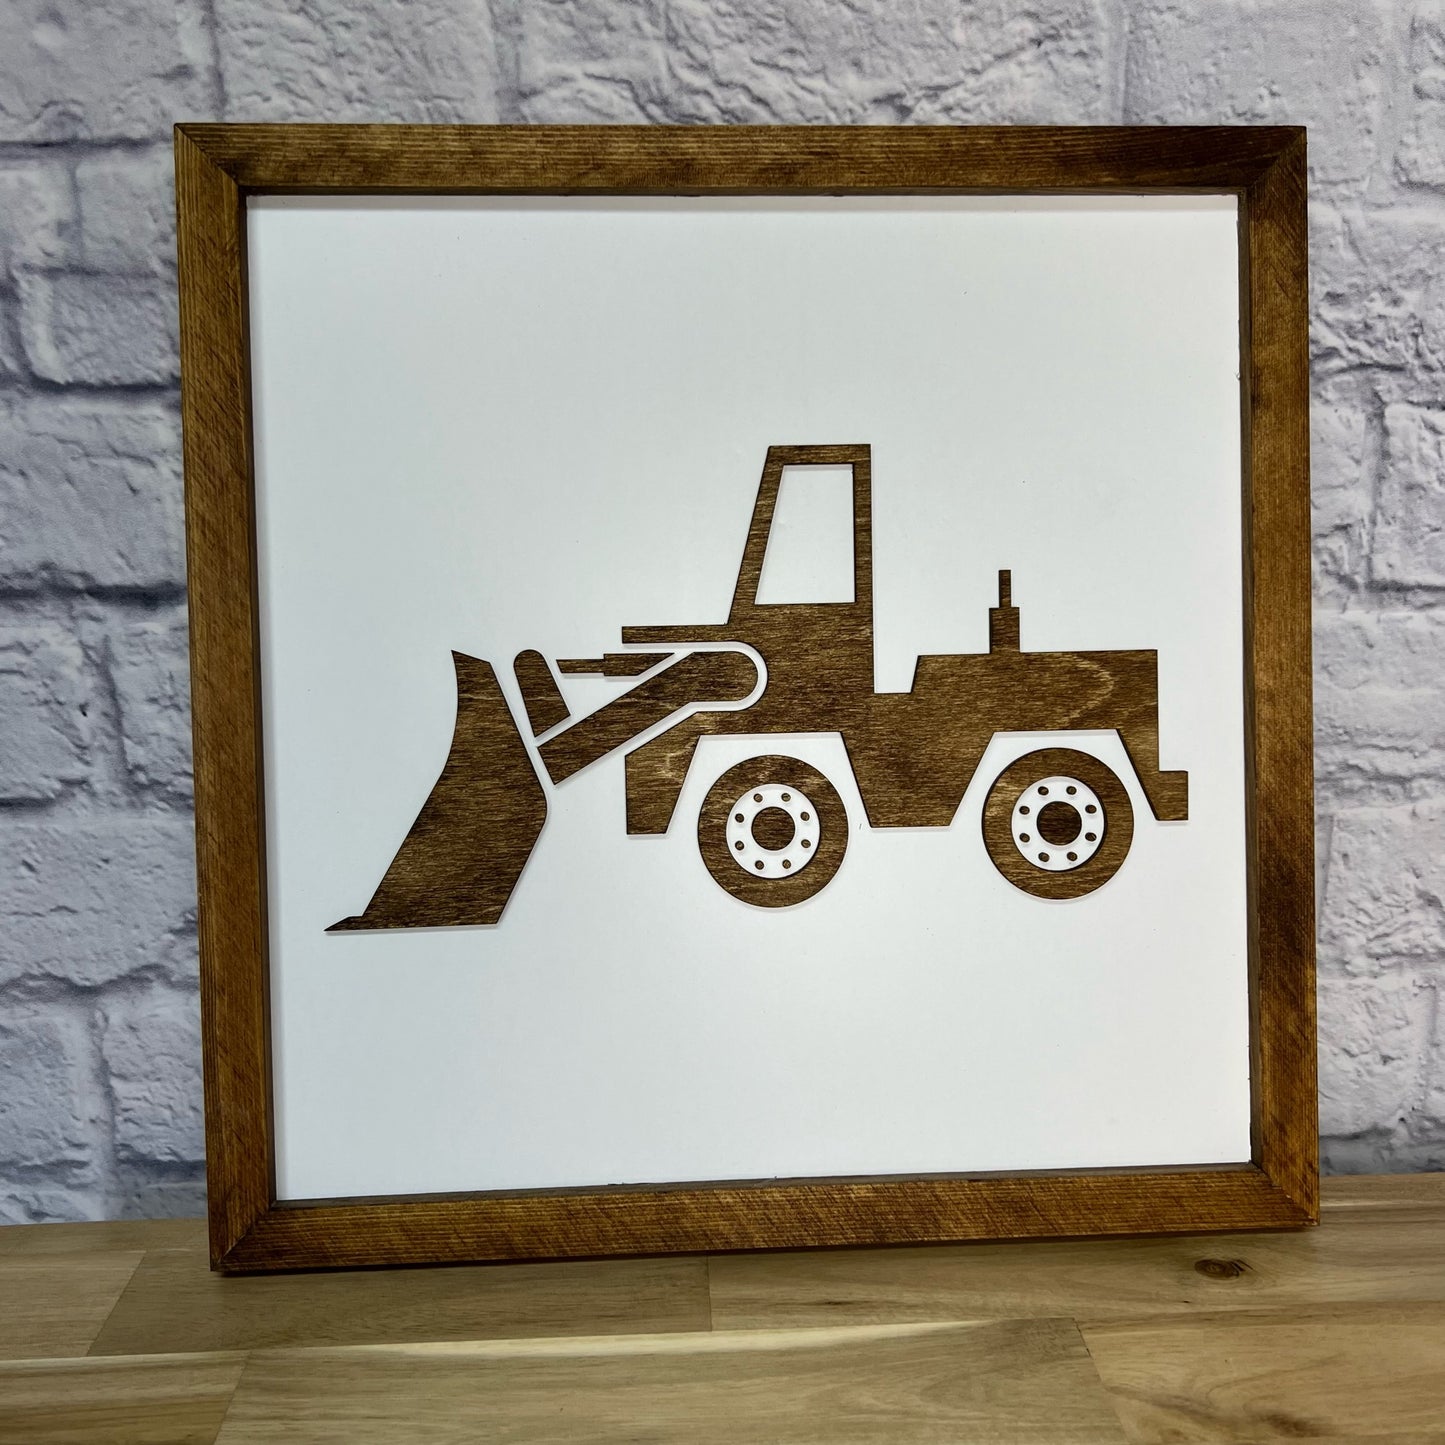 Construction Truck | 16x16 inch Wood Sign | Construction Room Decor